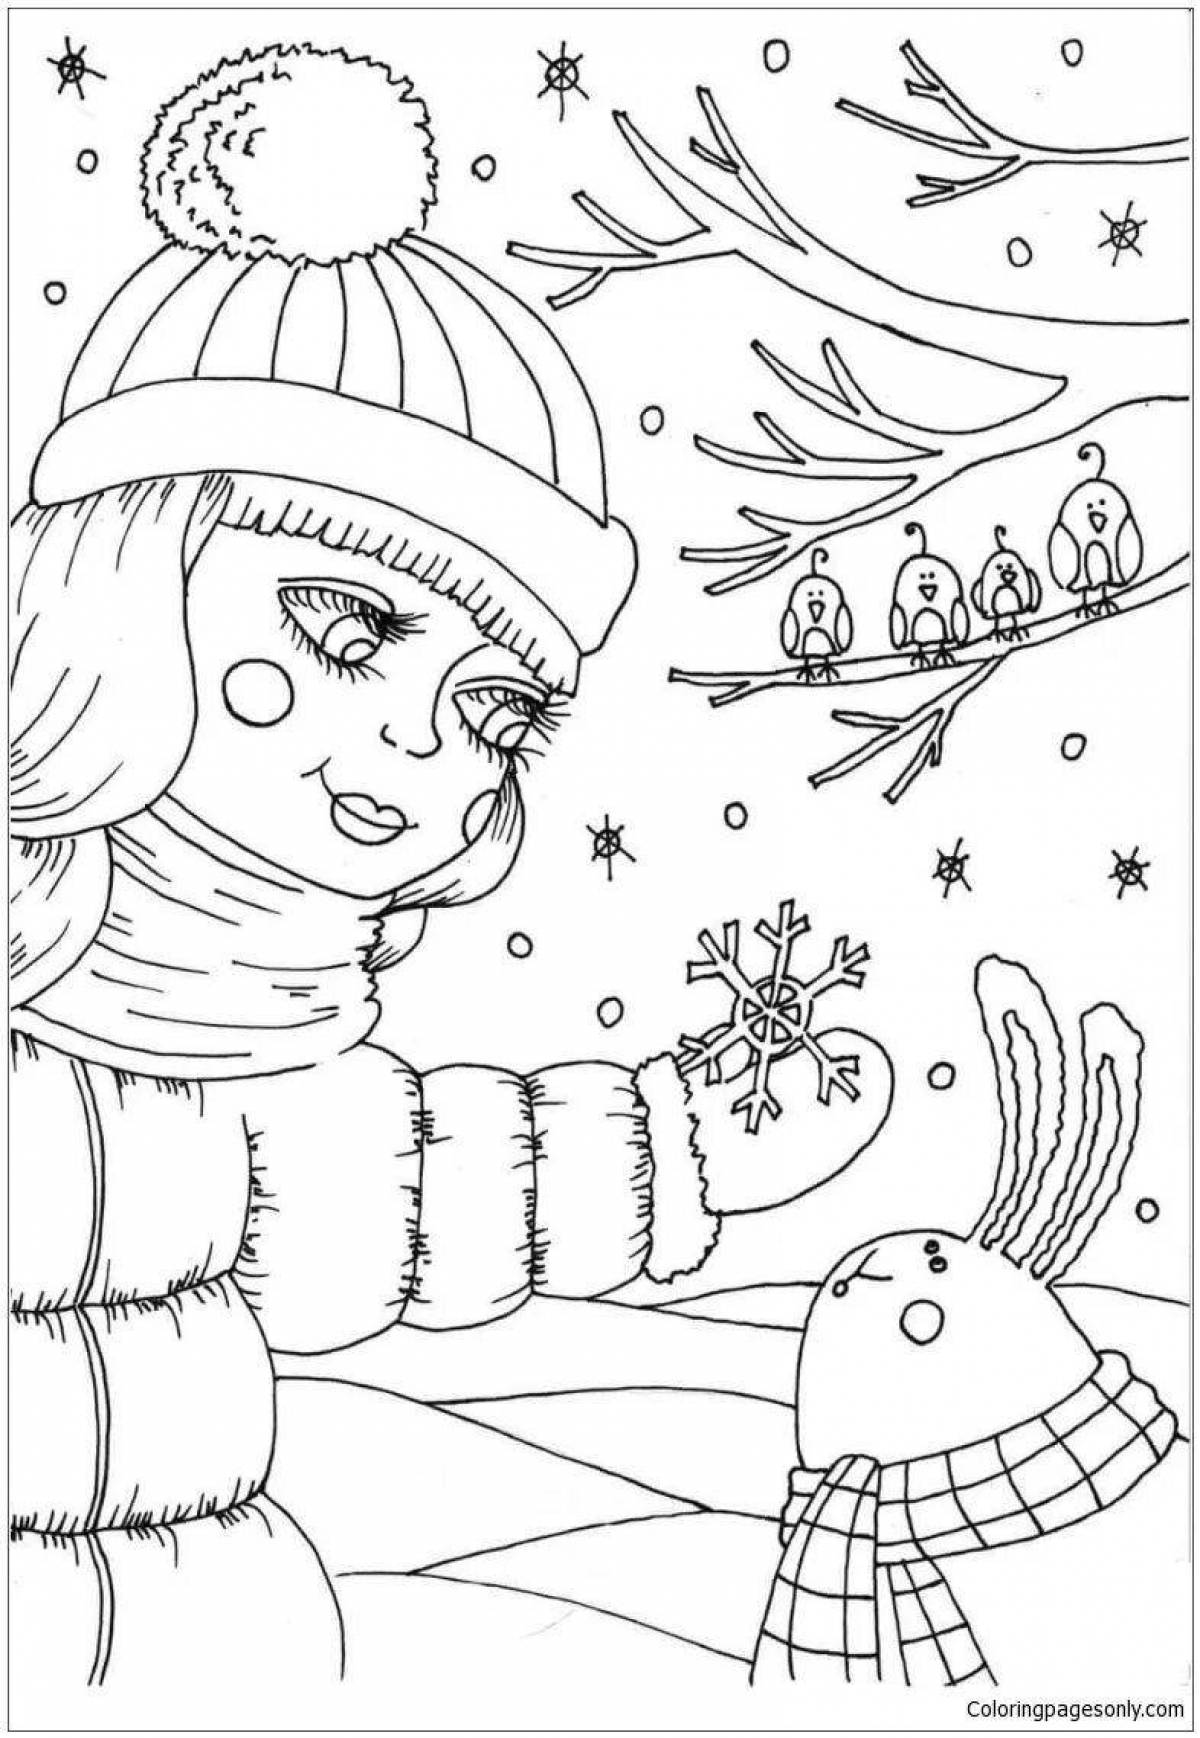 Charming january coloring book for kids 6-7 years old